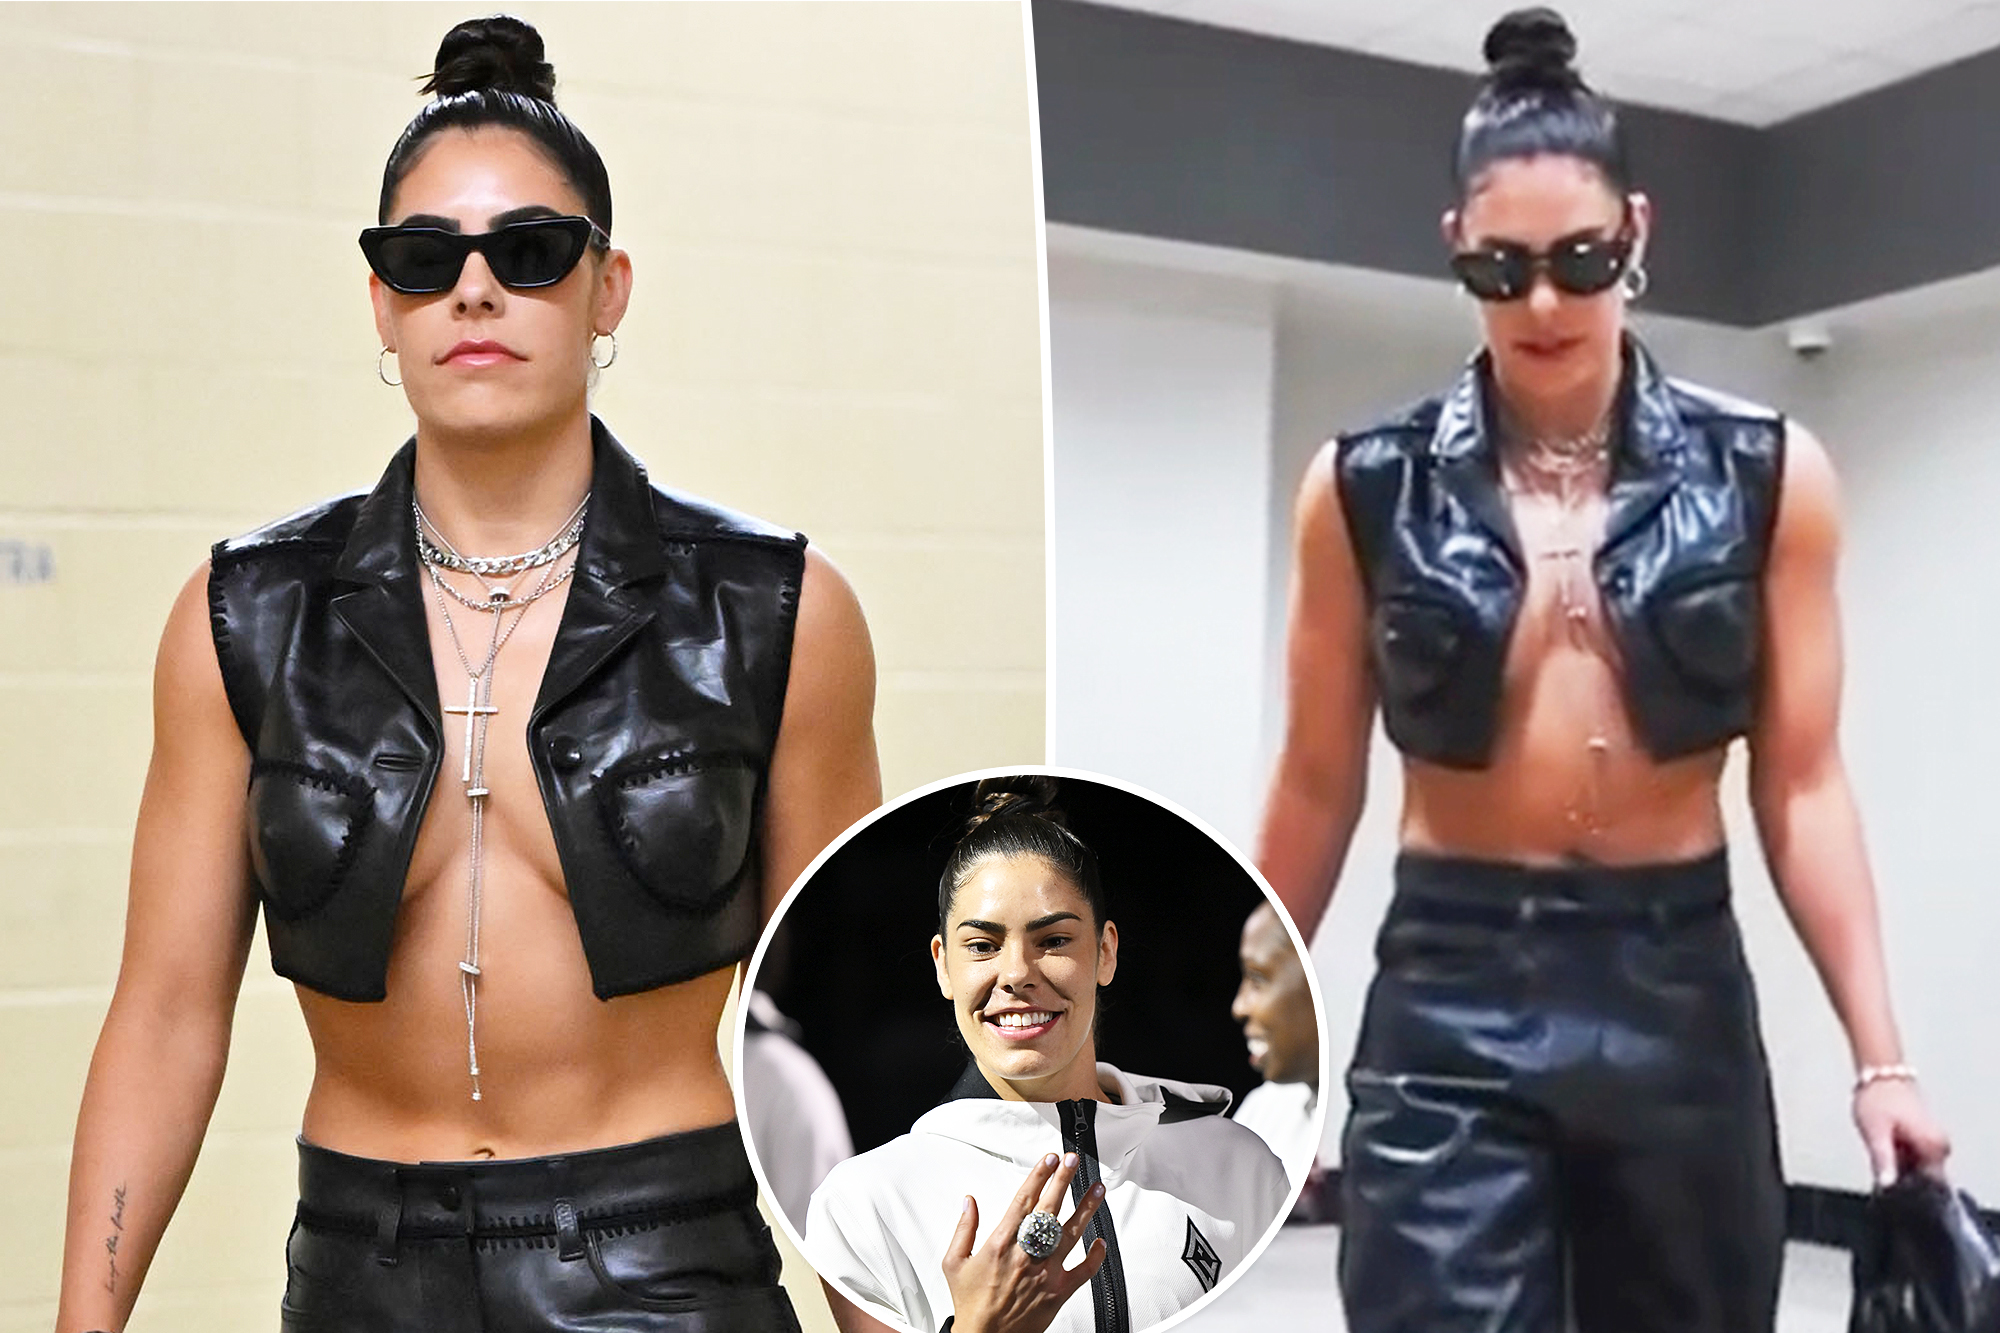 WNBA Star Kelsey Plum Stuns in Leather Outfit Amid Divorce Drama